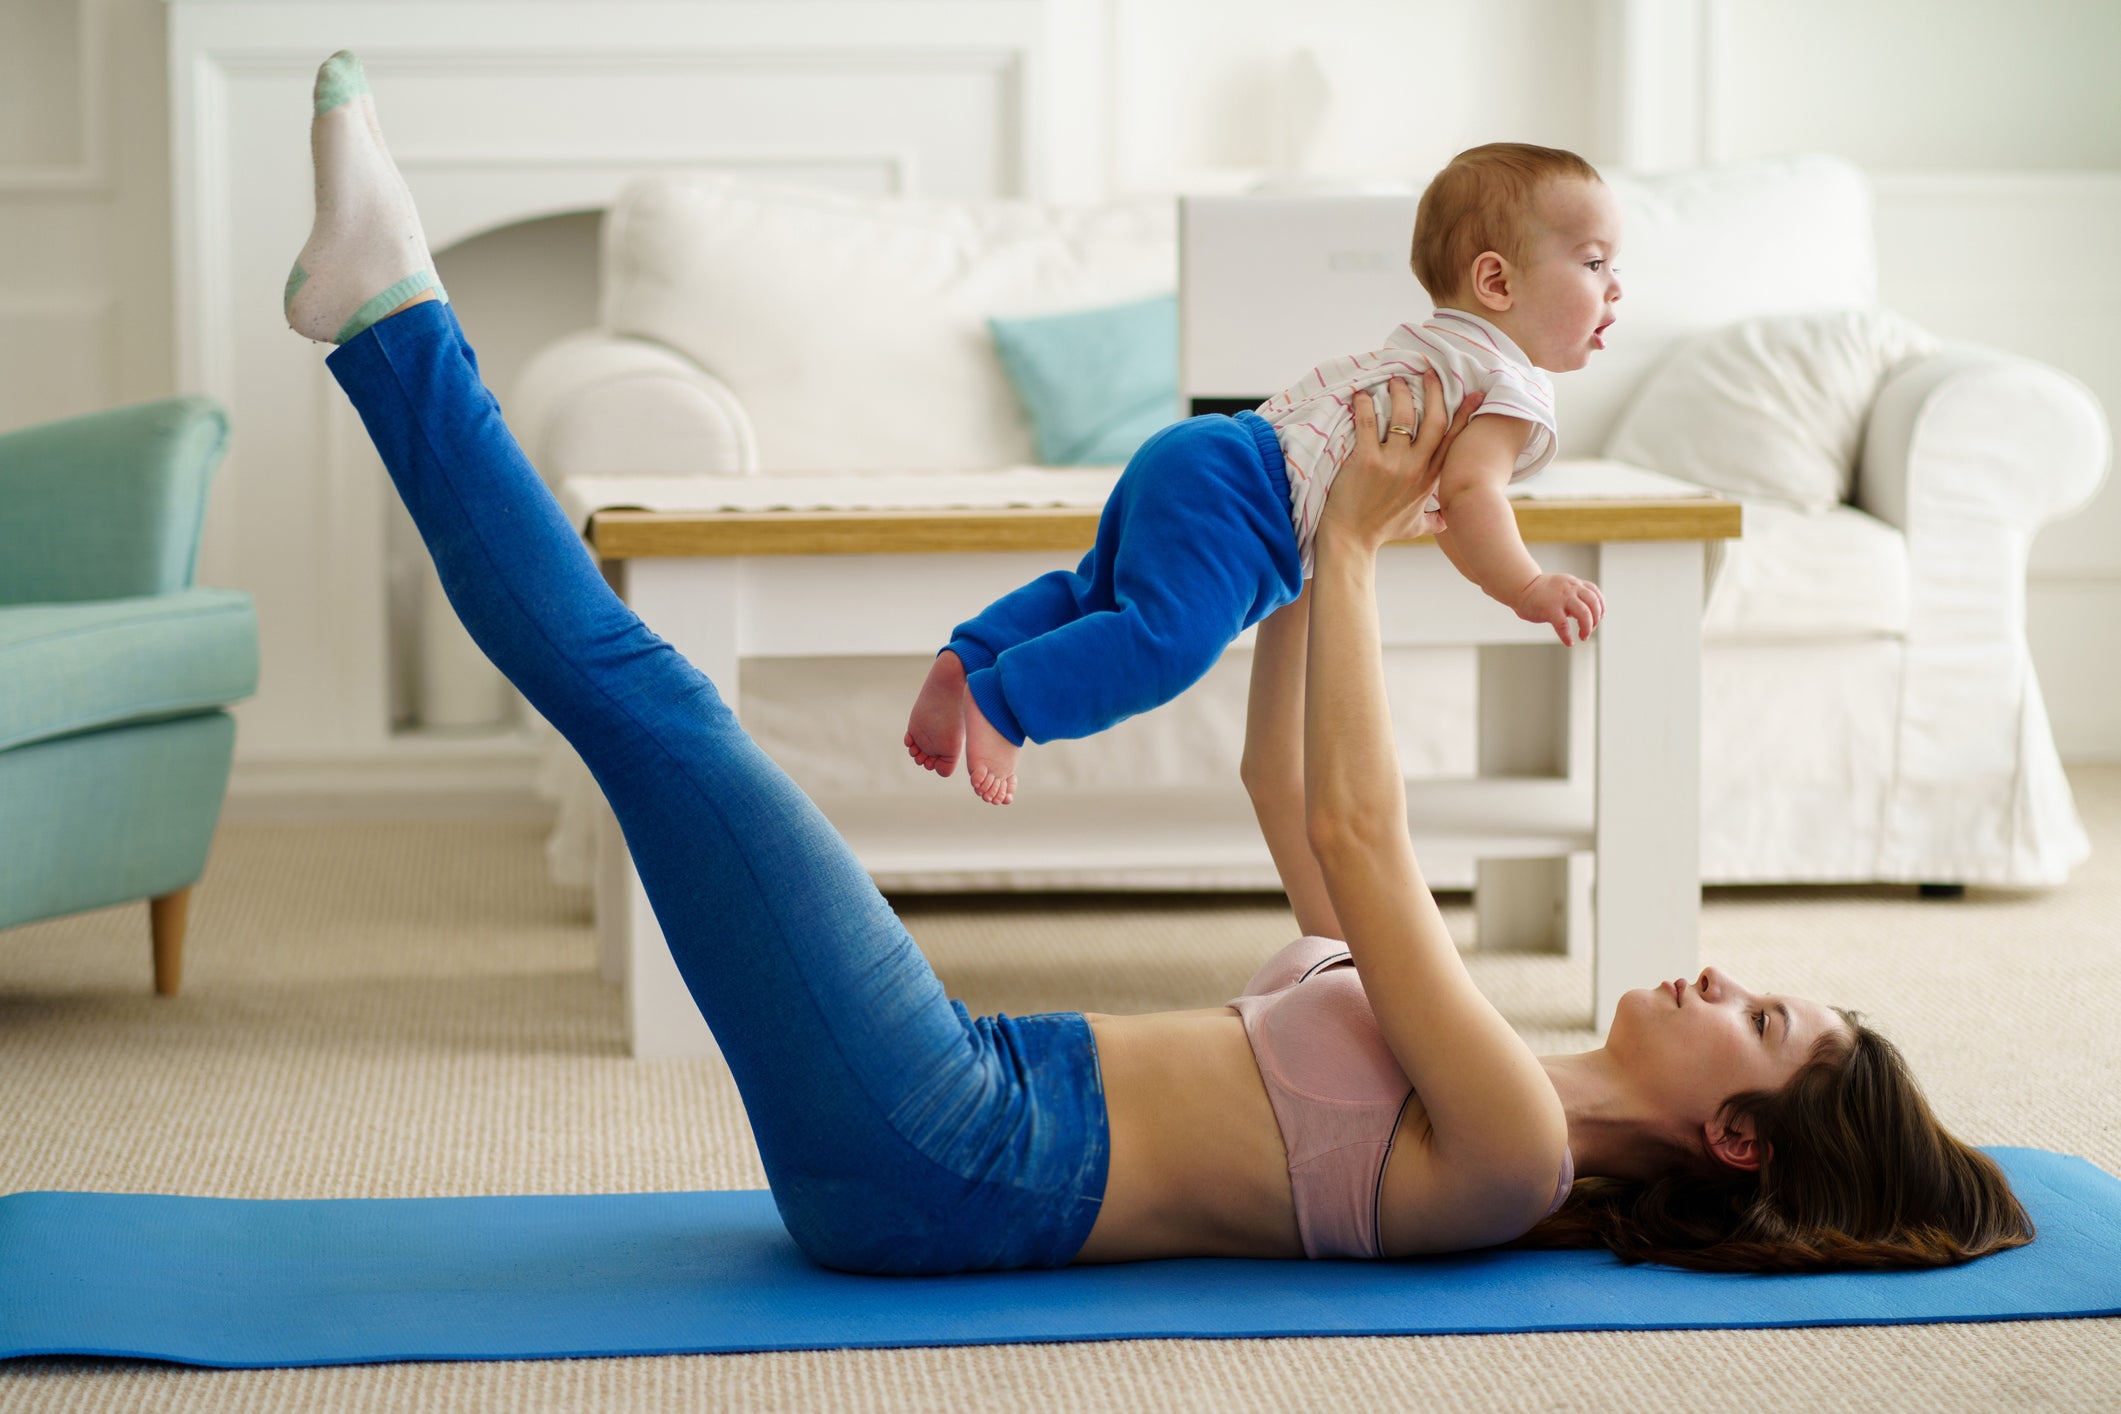 When and how to return to sport after childbirth?